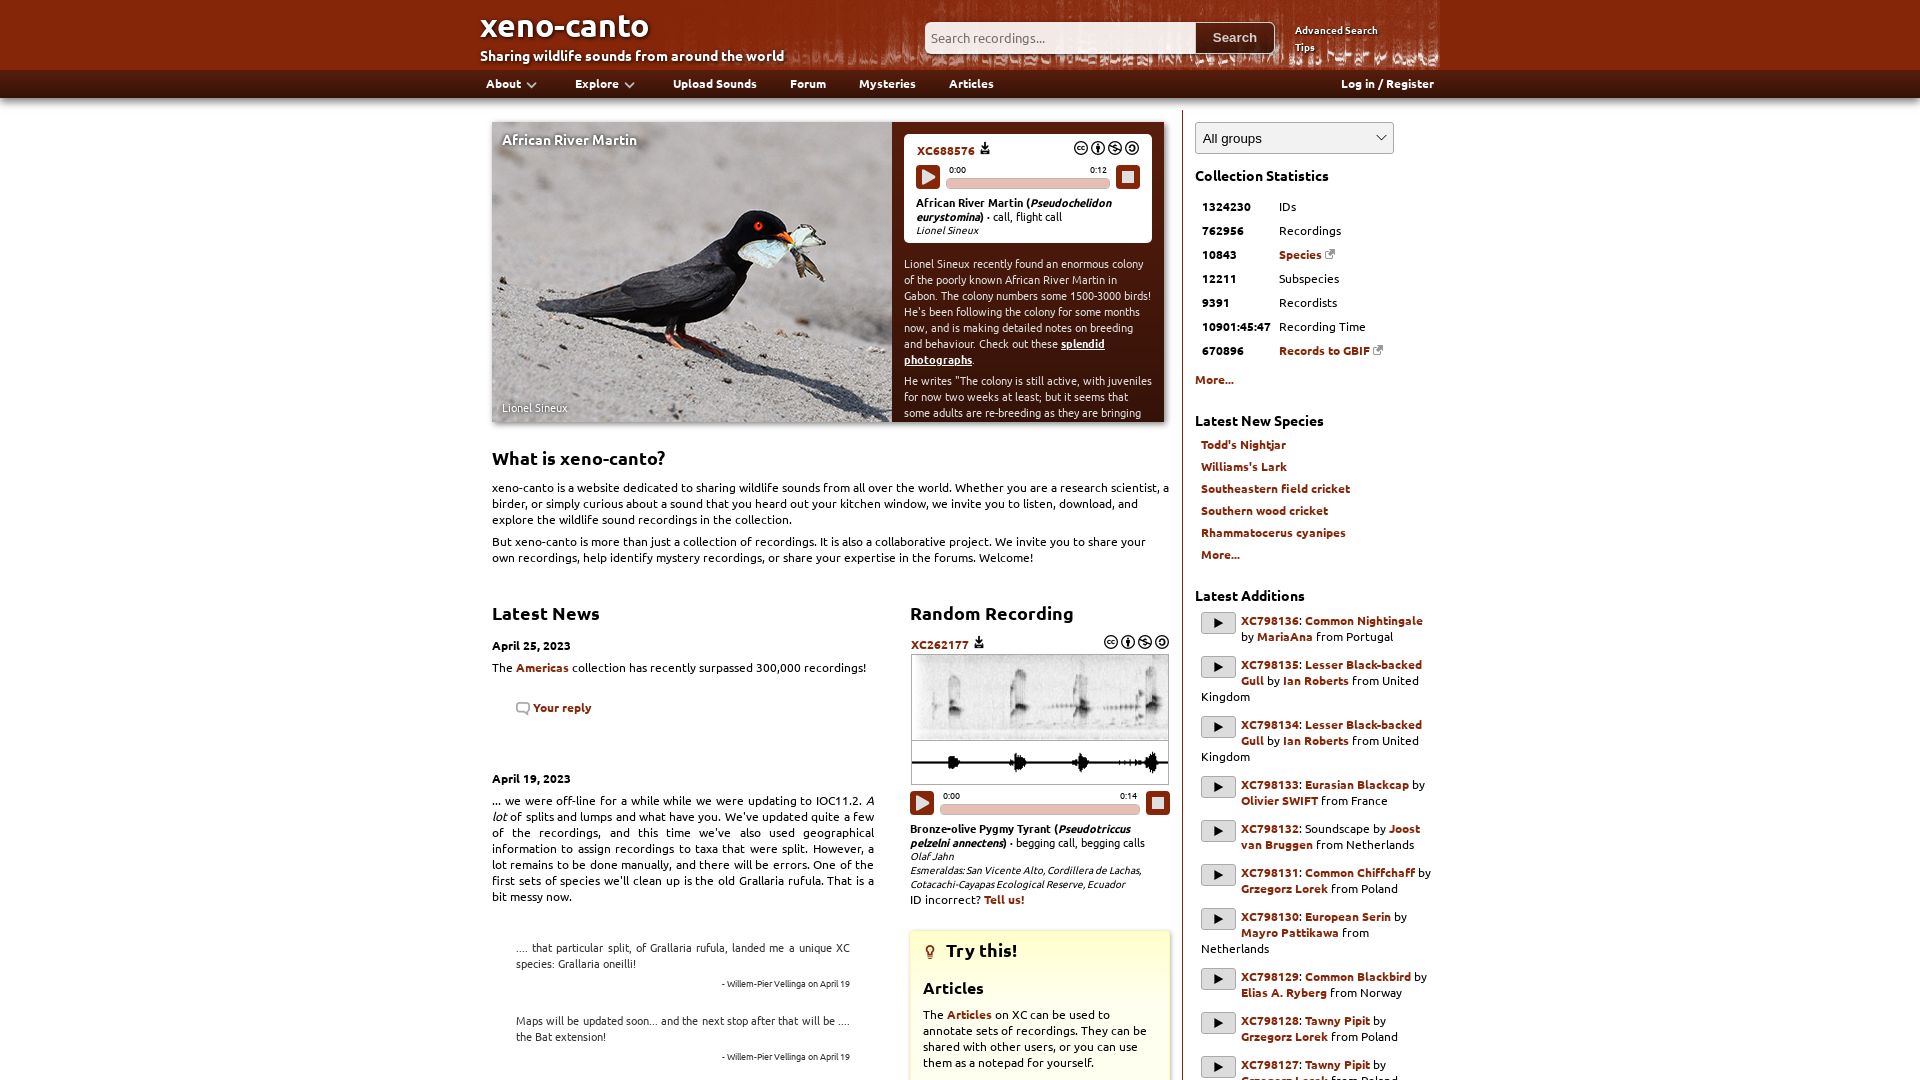 Website status xeno-canto.org is   ONLINE